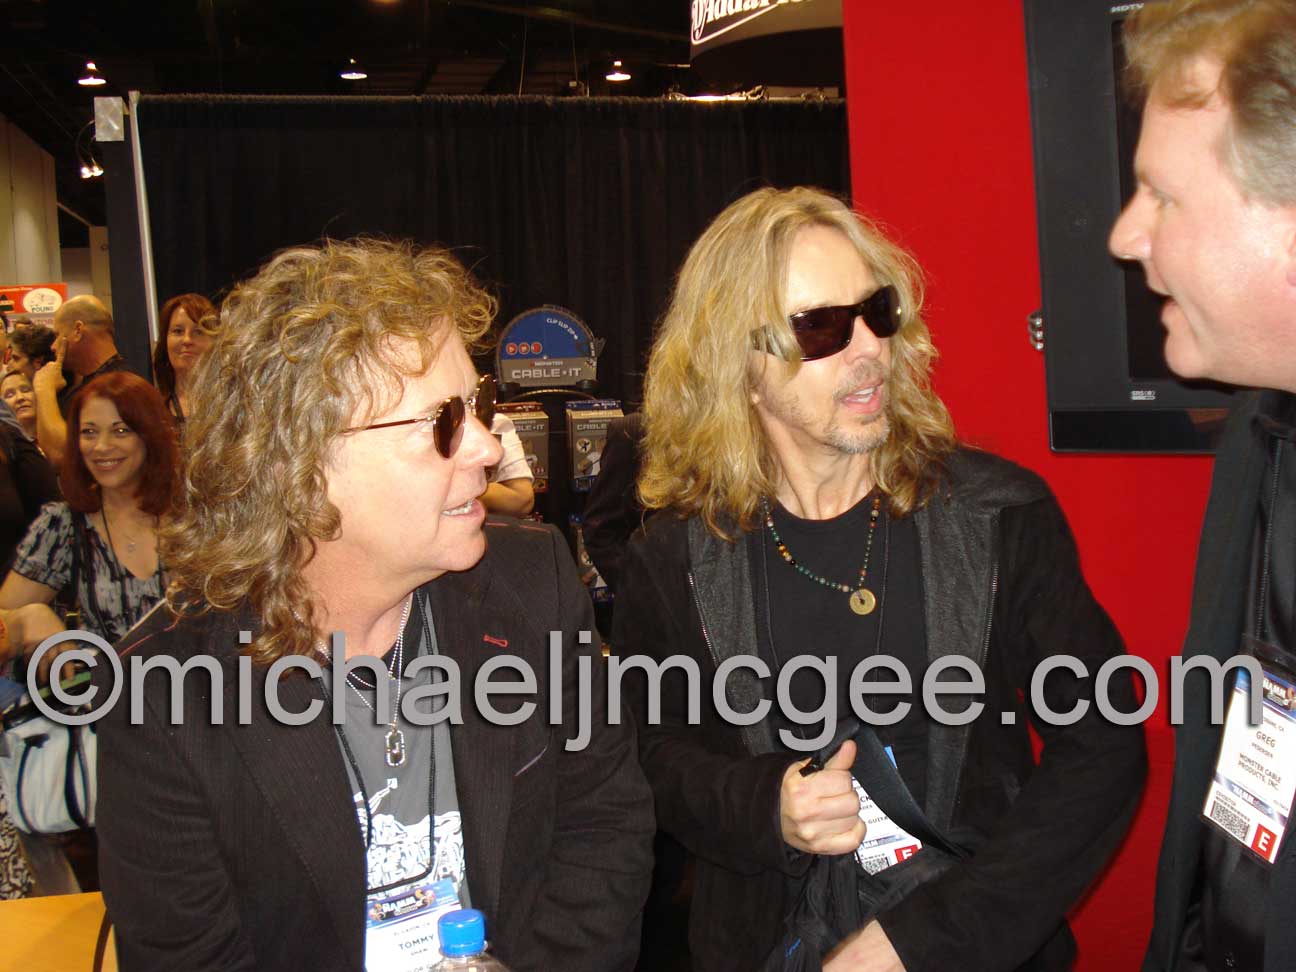 Tommy Shaw / michaeljmcgee.com